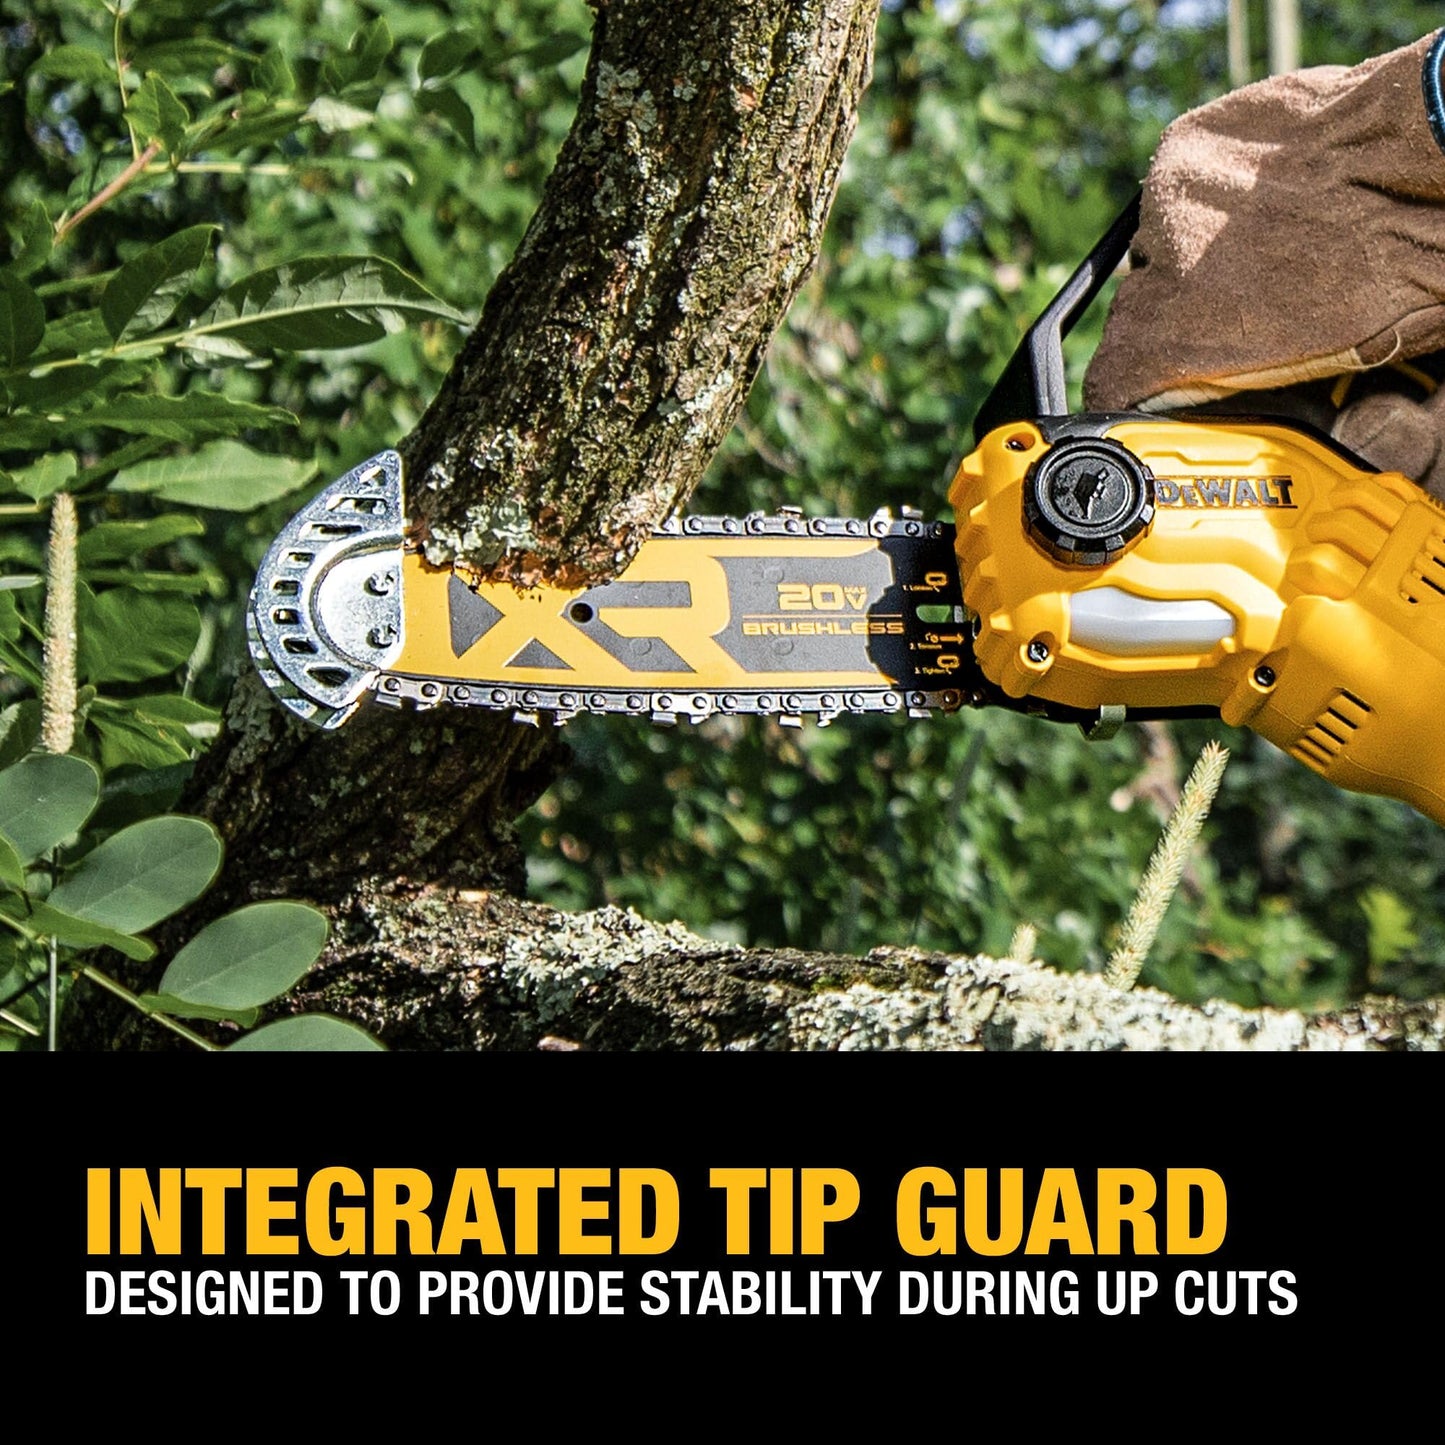 DEWALT 20V MAX Pruning Chainsaw, 8 Inch Bare Tool Only (DCCS623B)